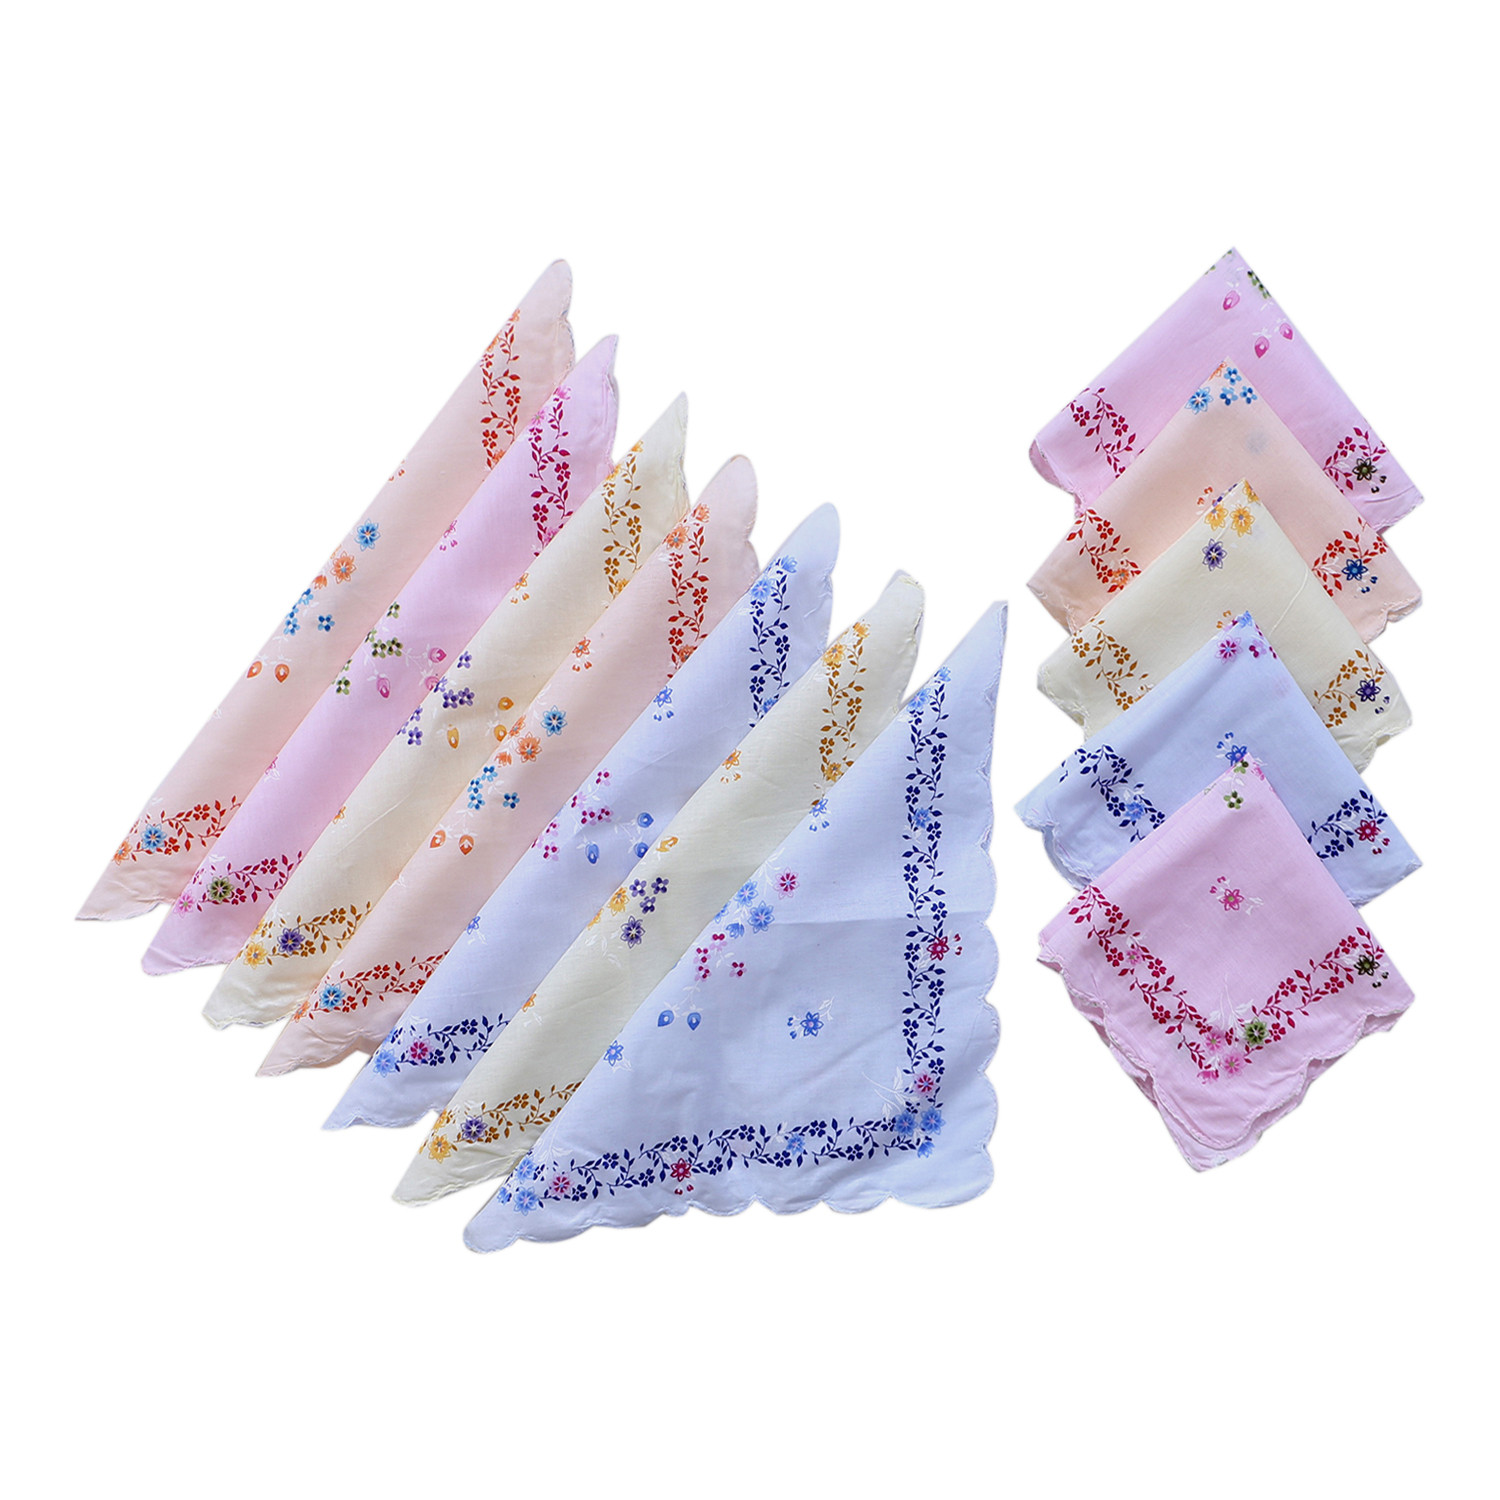 Kuber Industries Handkerchiefs|Leaf Print Cutwork Soft Cotton Hankies For Woman,Girls & Wicking Sweat from Hands,Face,Set of 12 (Multicolor)